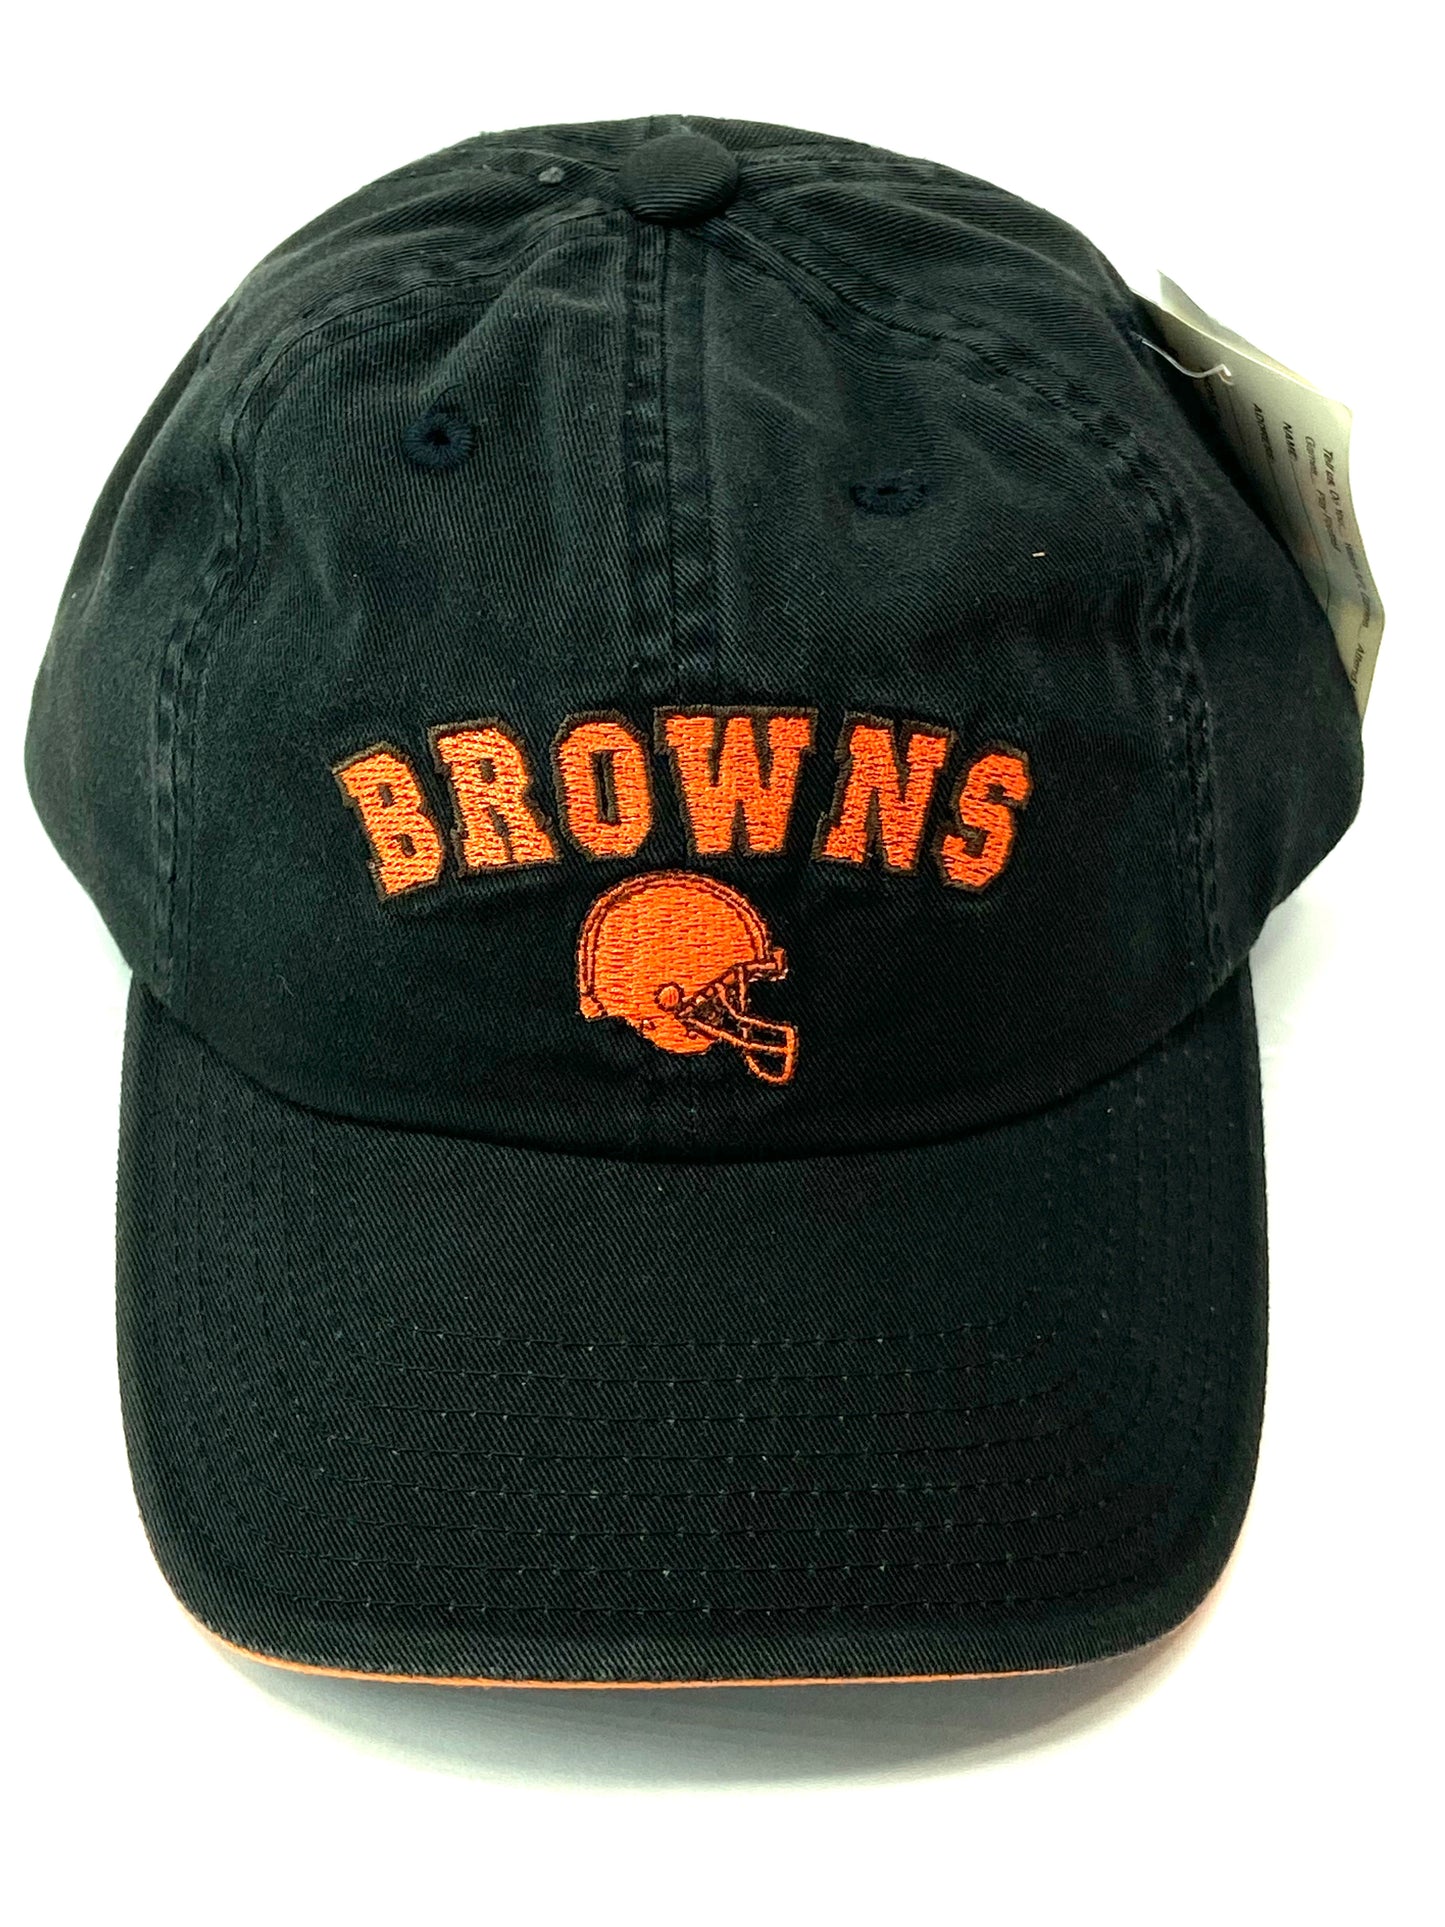 Cleveland Browns Vintage NFL Unstructured Black Logo Cap by American Needle